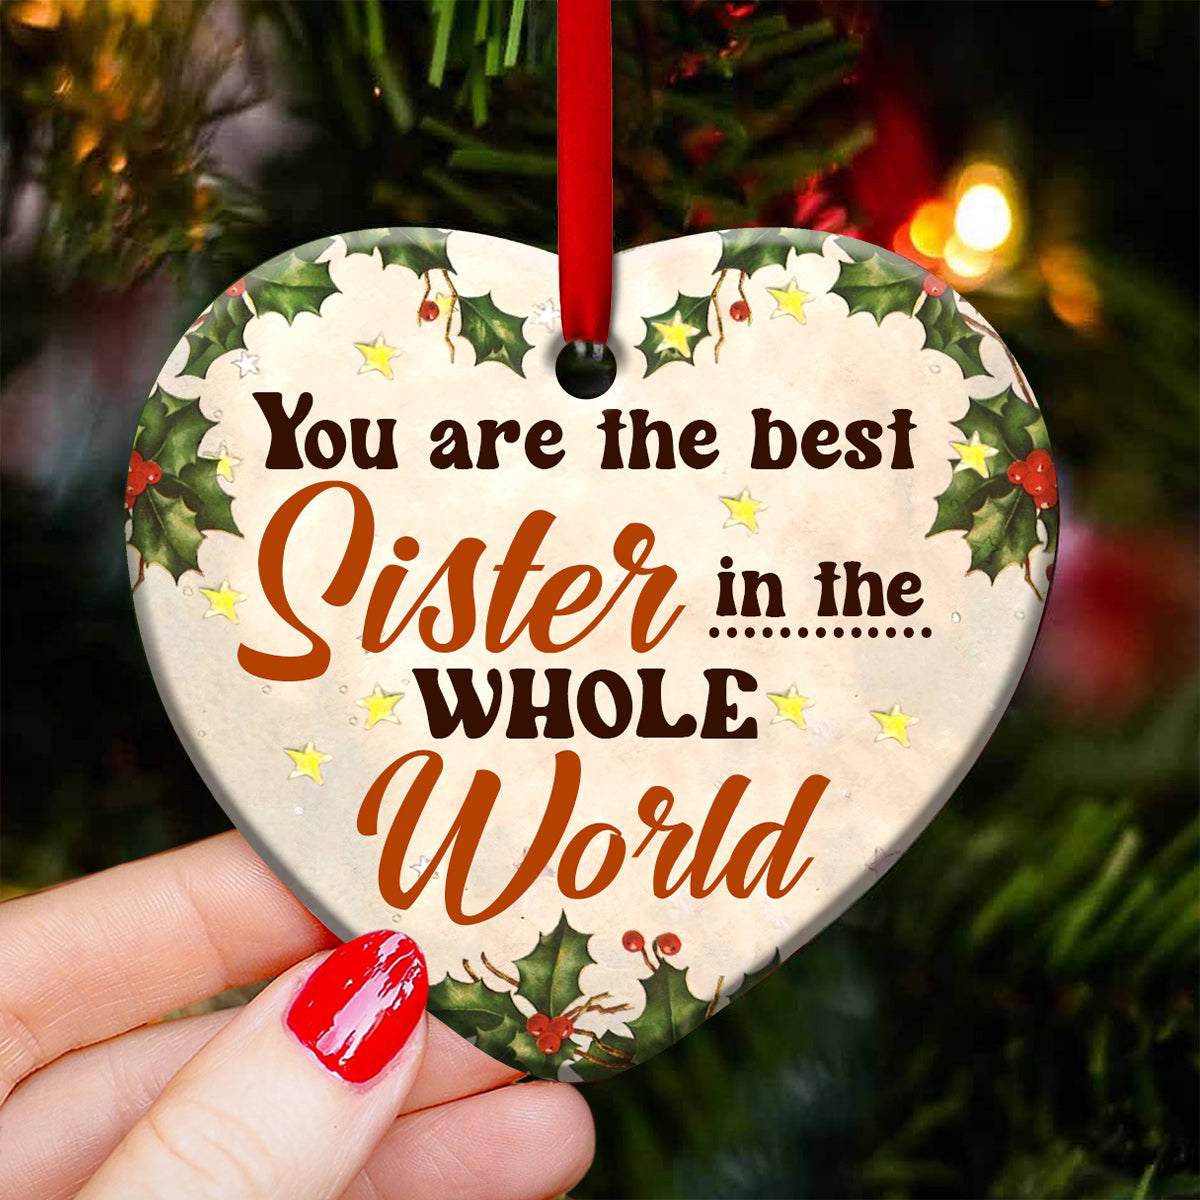 Family Sister Angel You Are The Best Sister In The Whole World - Heart Ornament - Owls Matrix LTD